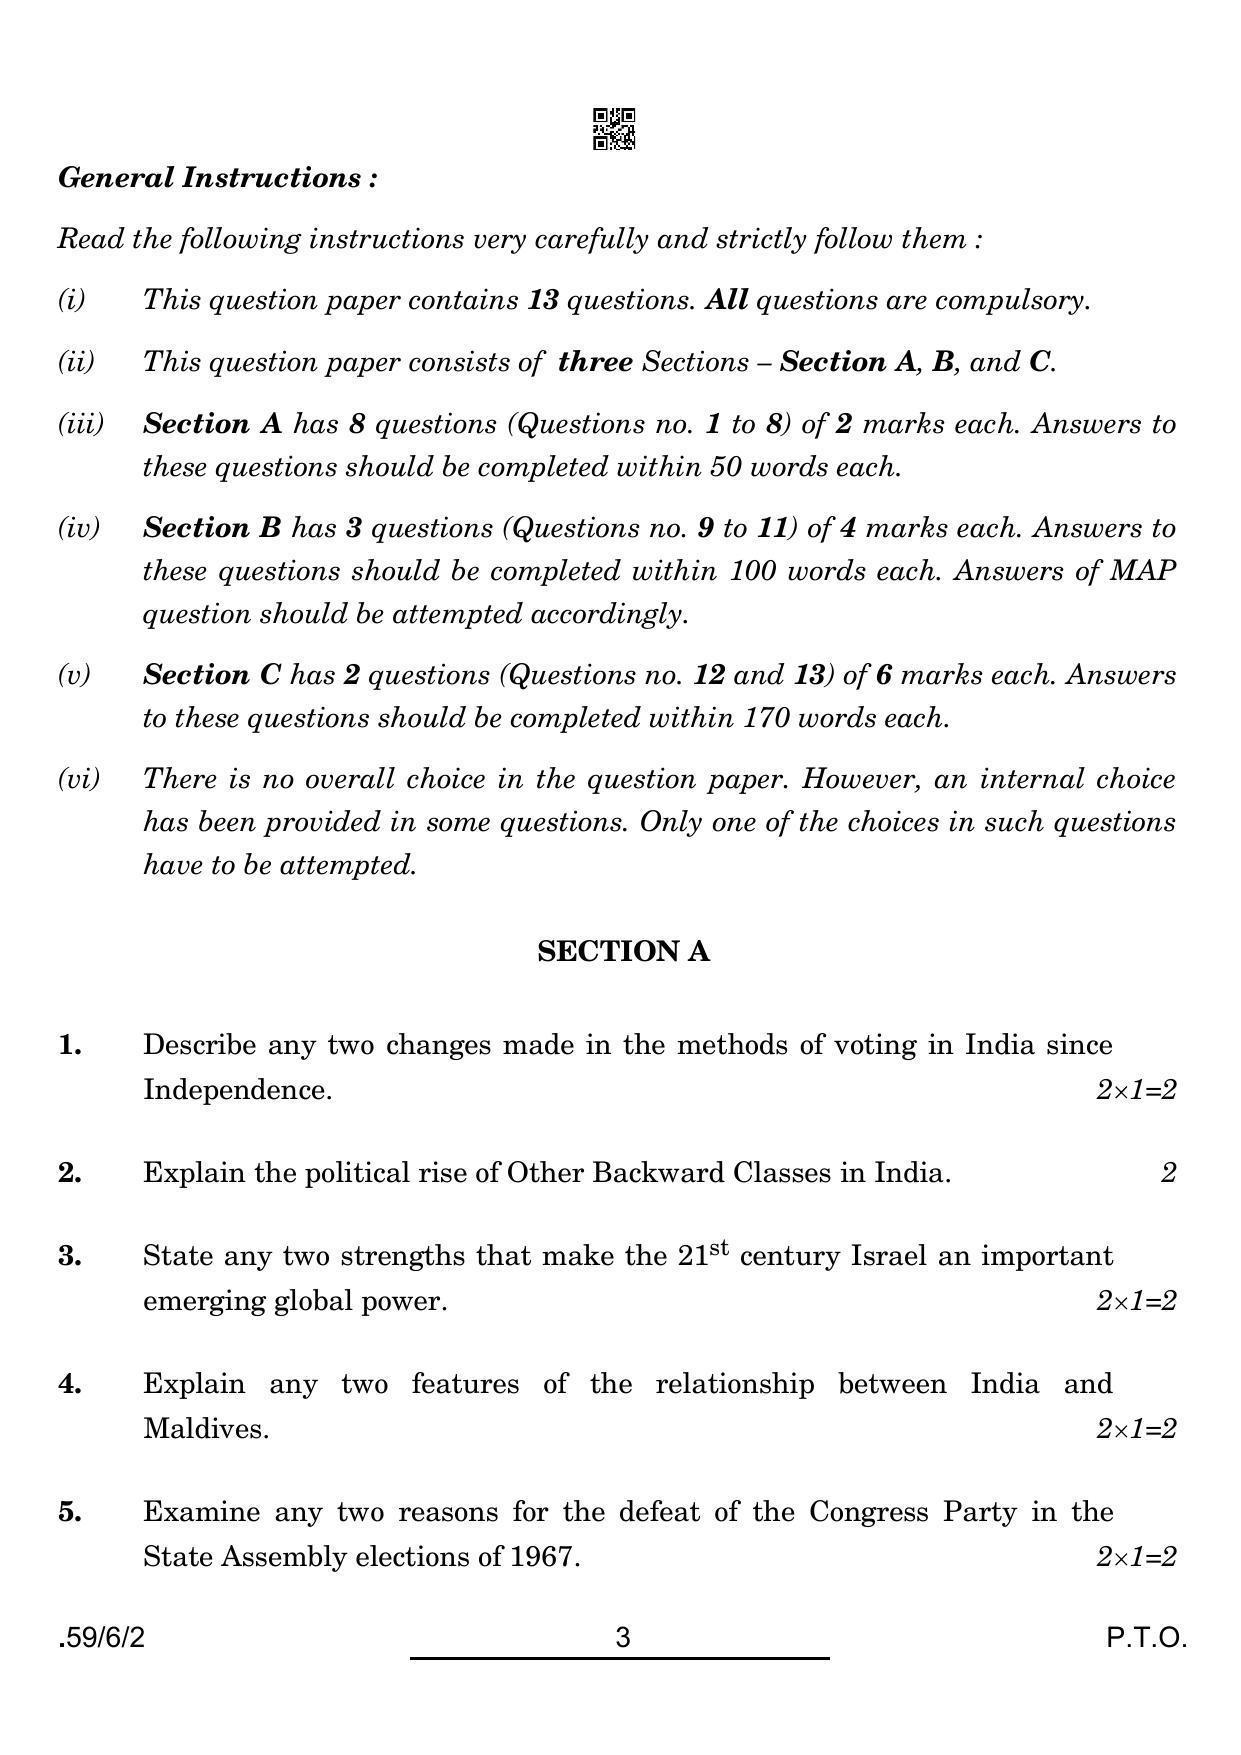 CBSE Class 12 59-6-2 POL SCIENCE 2022 Compartment Question Paper - Page 3